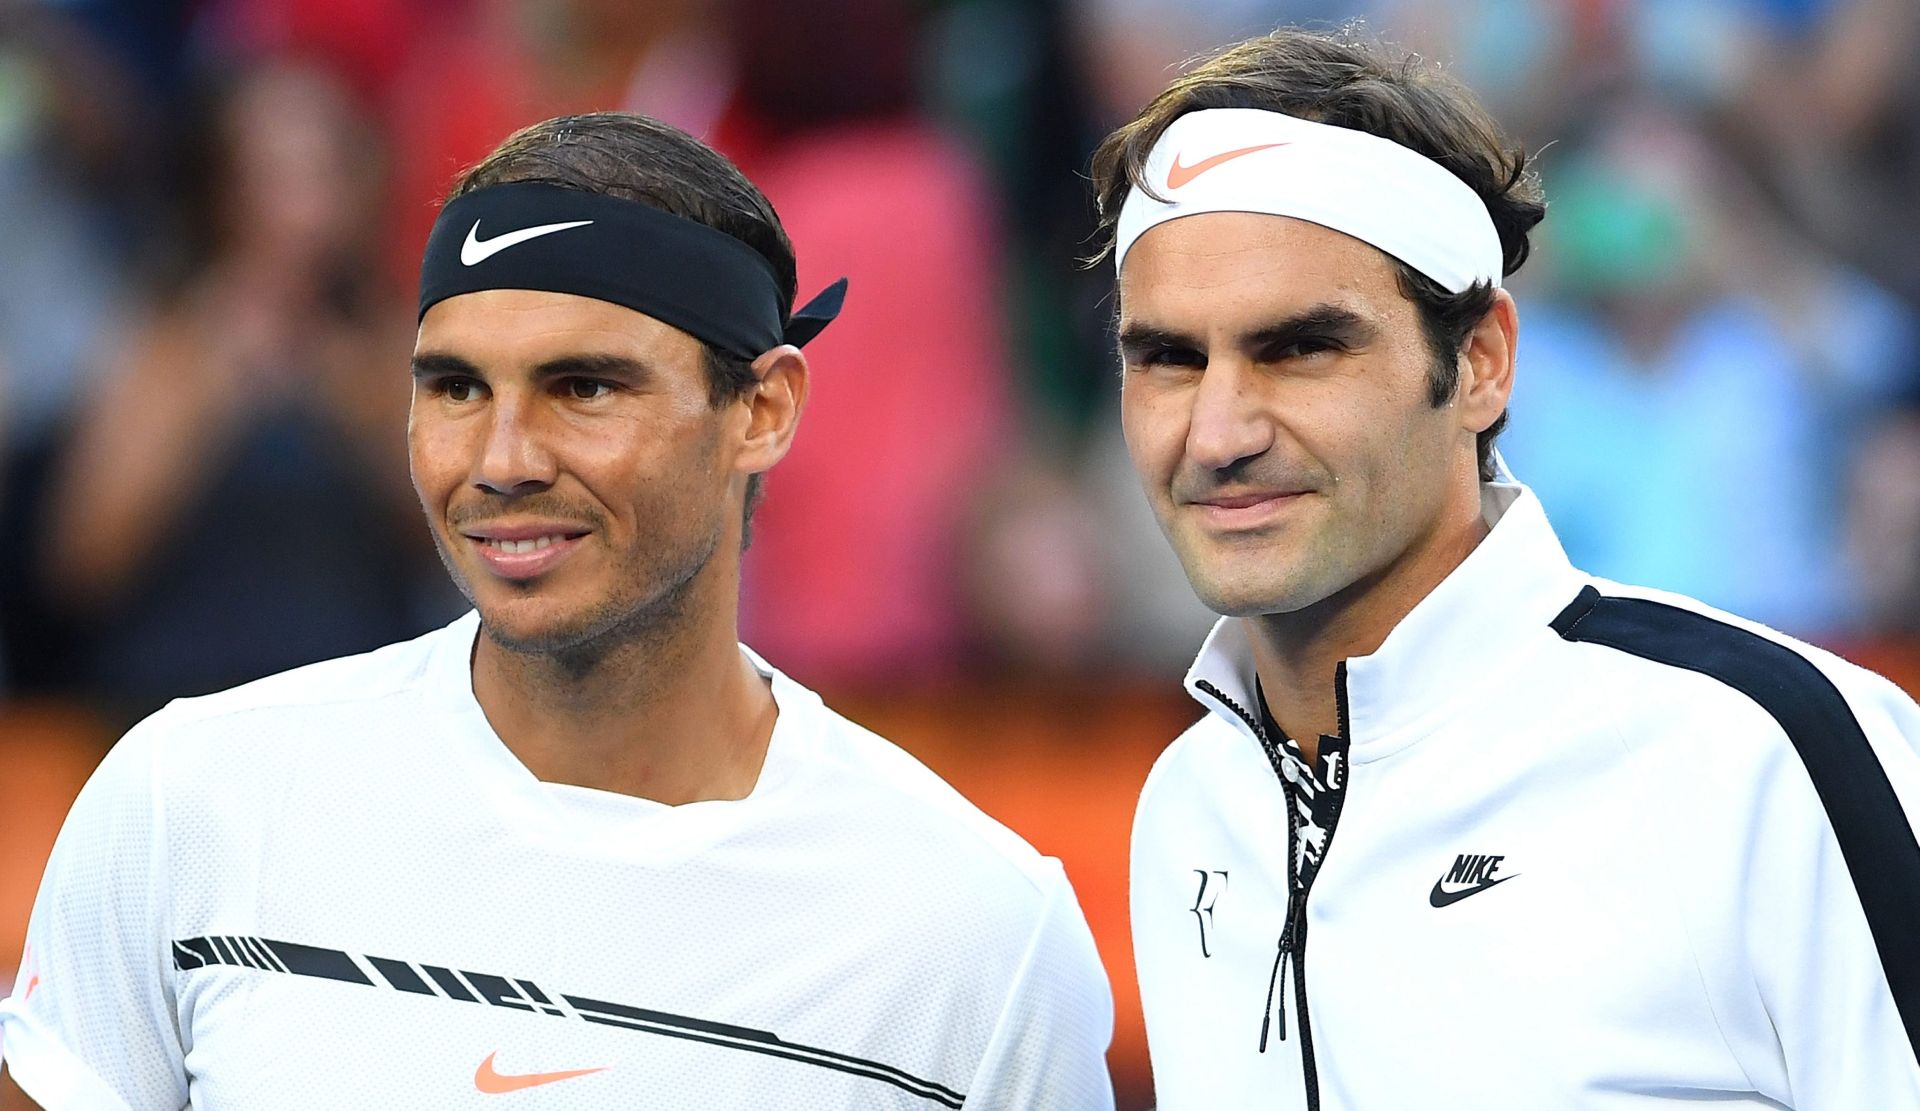 epa05758296 Rafael Nadal of Spain (L) and Roger Federer of Switzerland (R) pose for a photo ahead of their Men's Singles Finalat the Australian Open Grand Slam tennis tournament in Melbourne, Victoria, Australia, 29 January 2017. EPA/LUKAS COCH AUSTRALIA AND NEW ZEALAND OUT